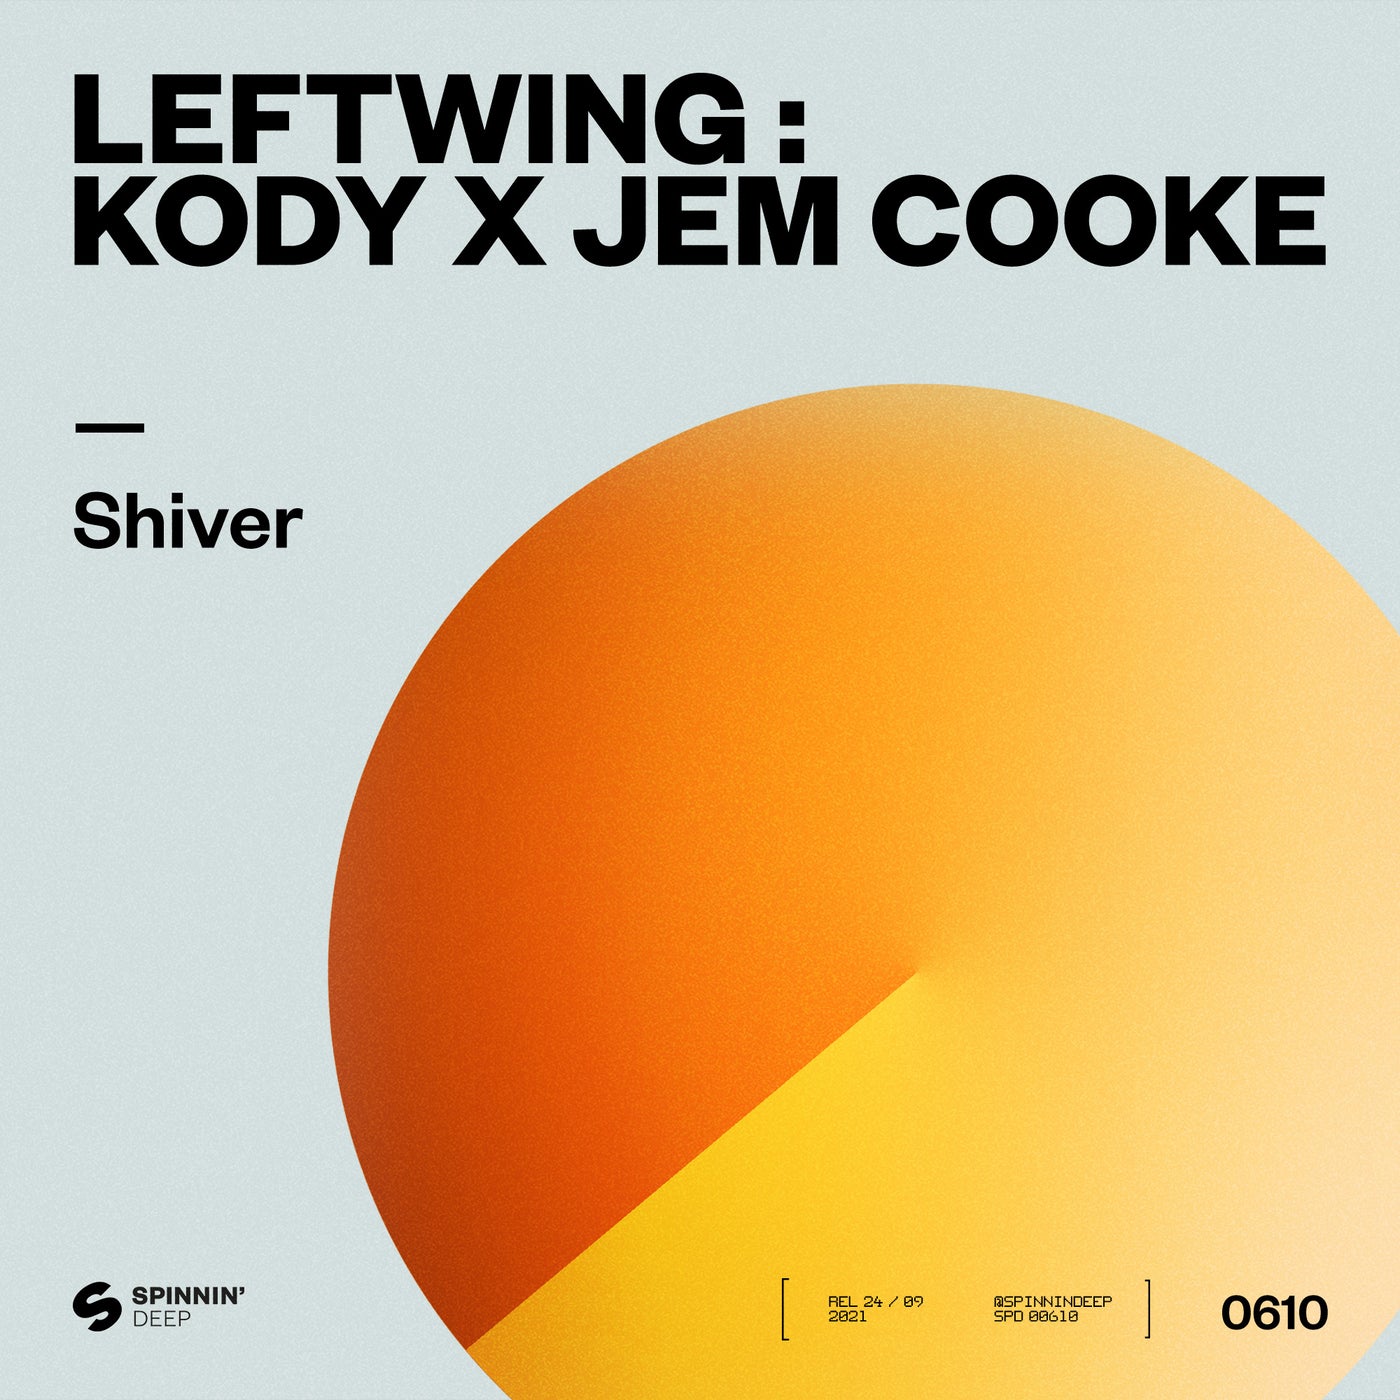 Leftwing: Kody & Jem Cooke - Shiver (Extended Mix)